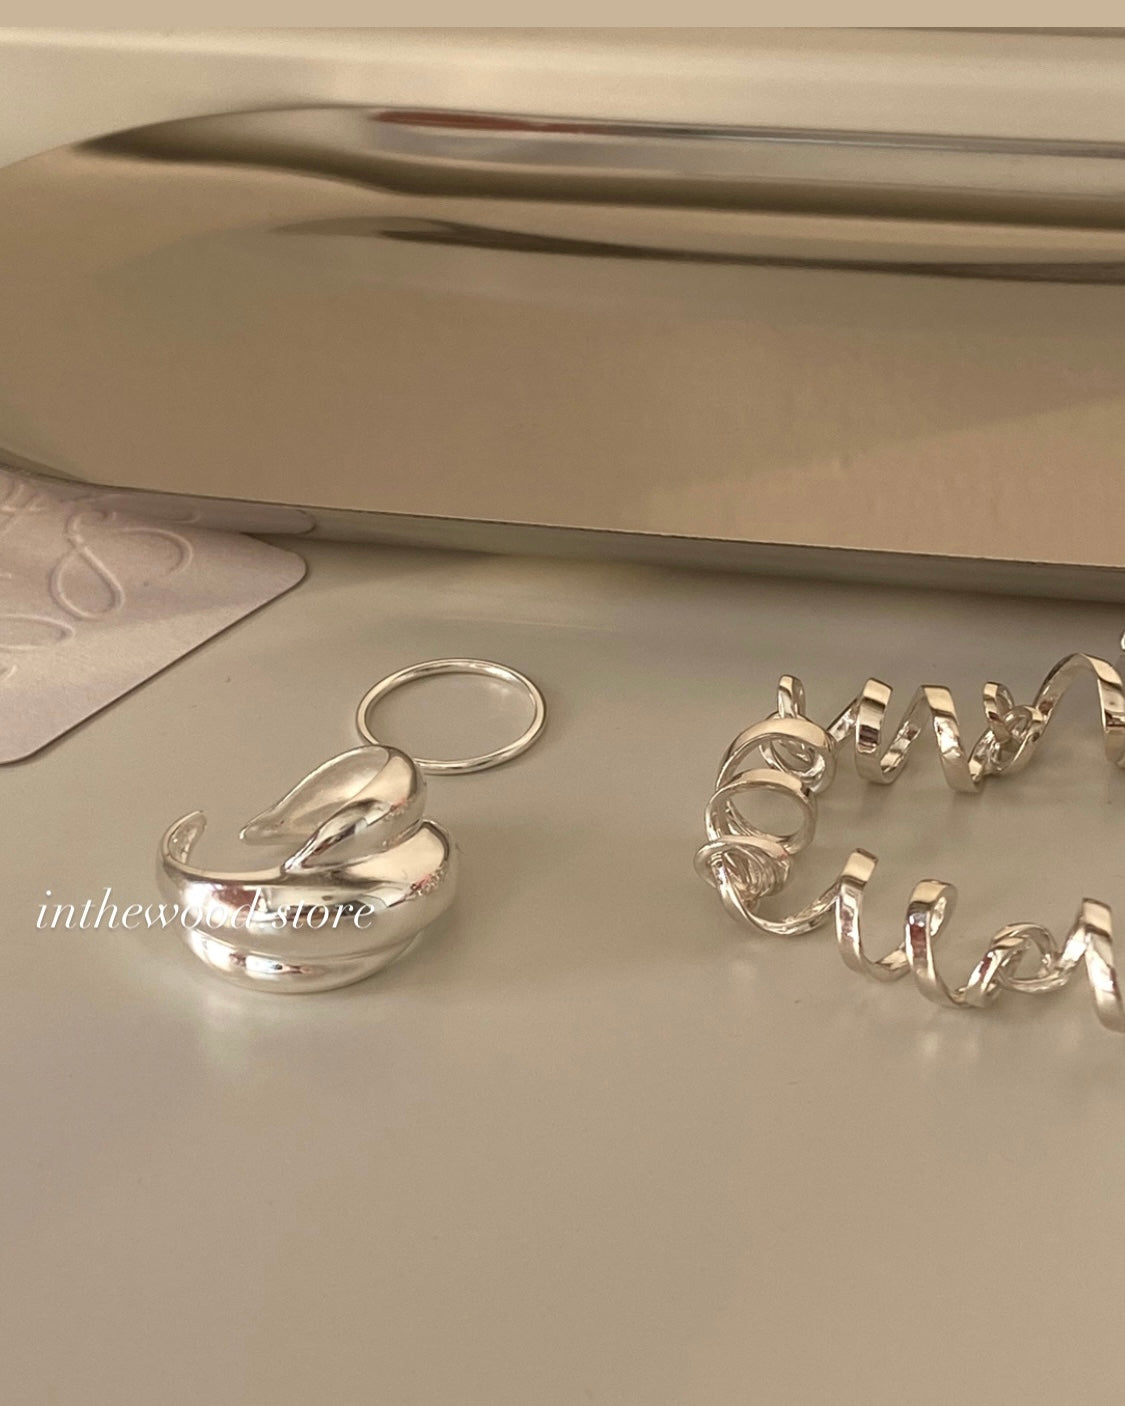 [925silver] Croissant Ring